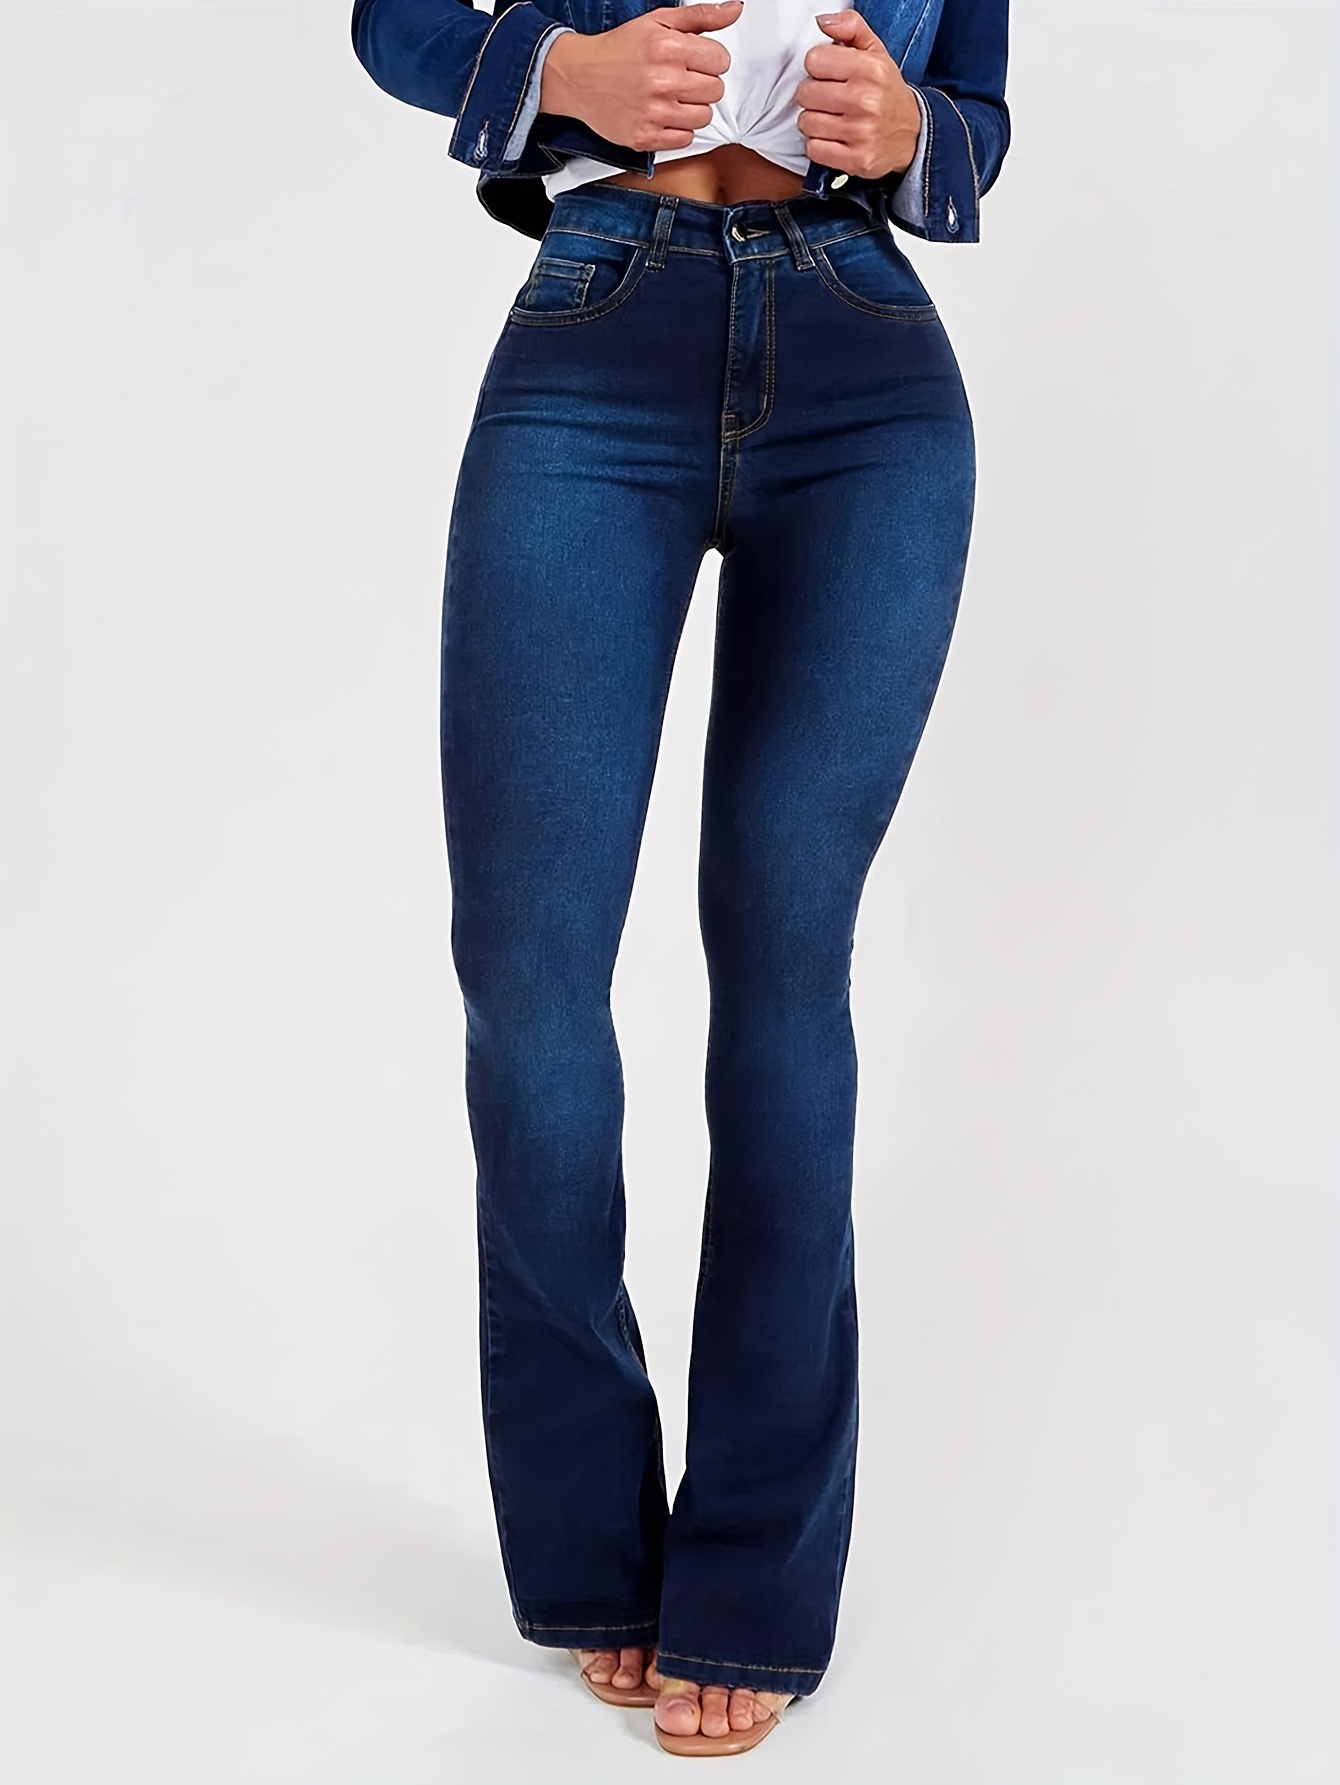 YYDGH Bell Bottom Jeans for Women Stretch Flare Dark Blue Bootcut